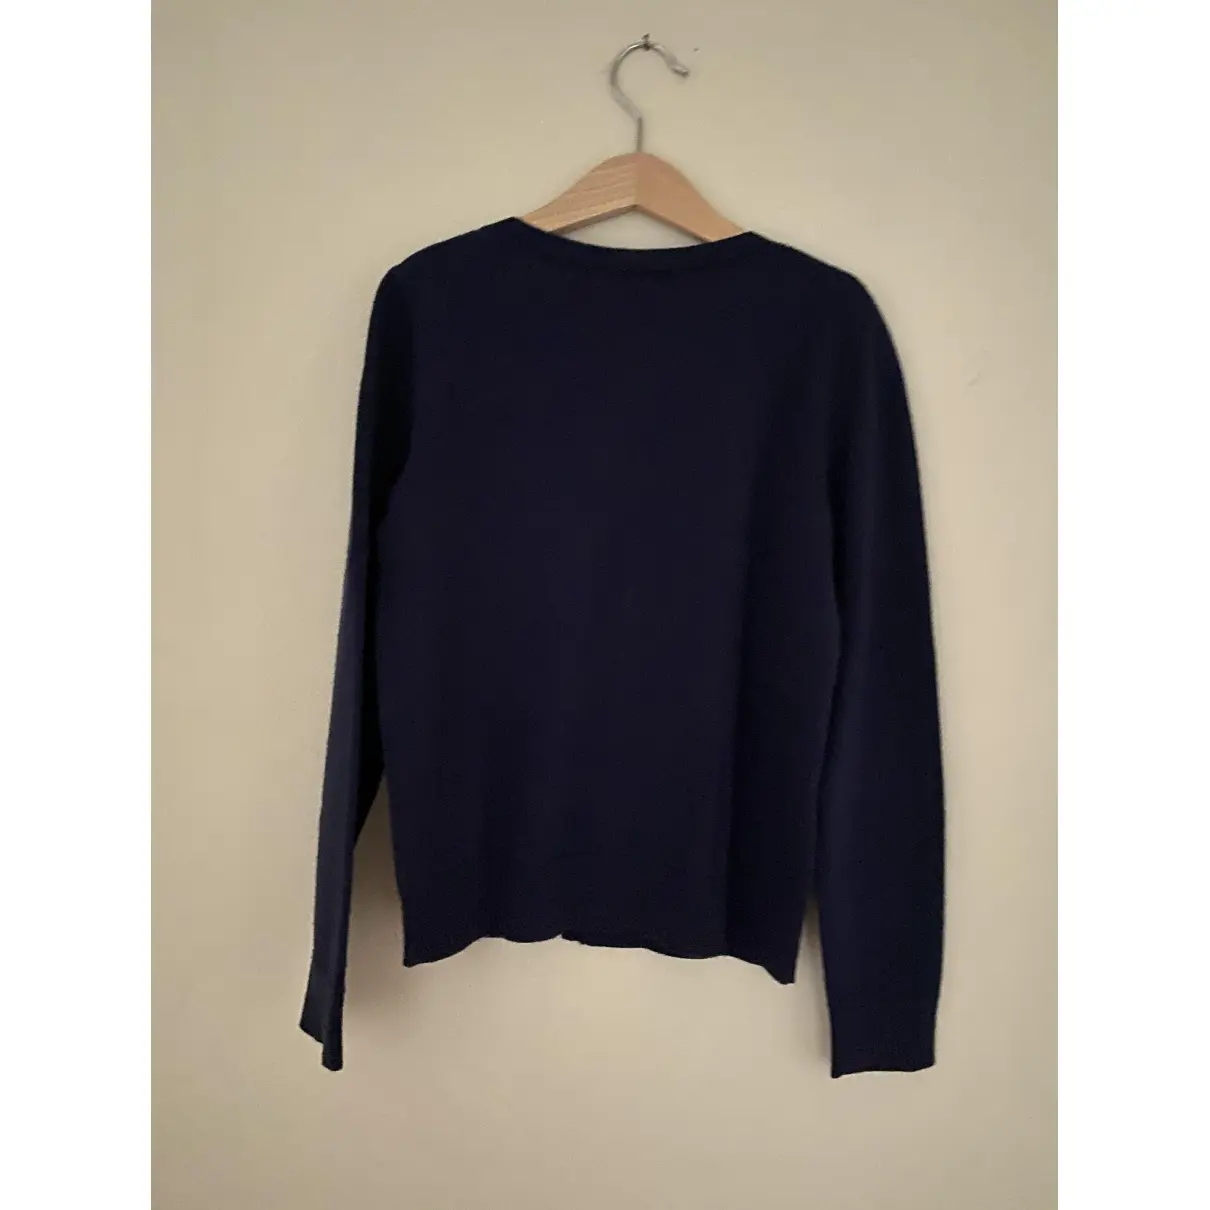 Bonpoint Wool sweater for sale